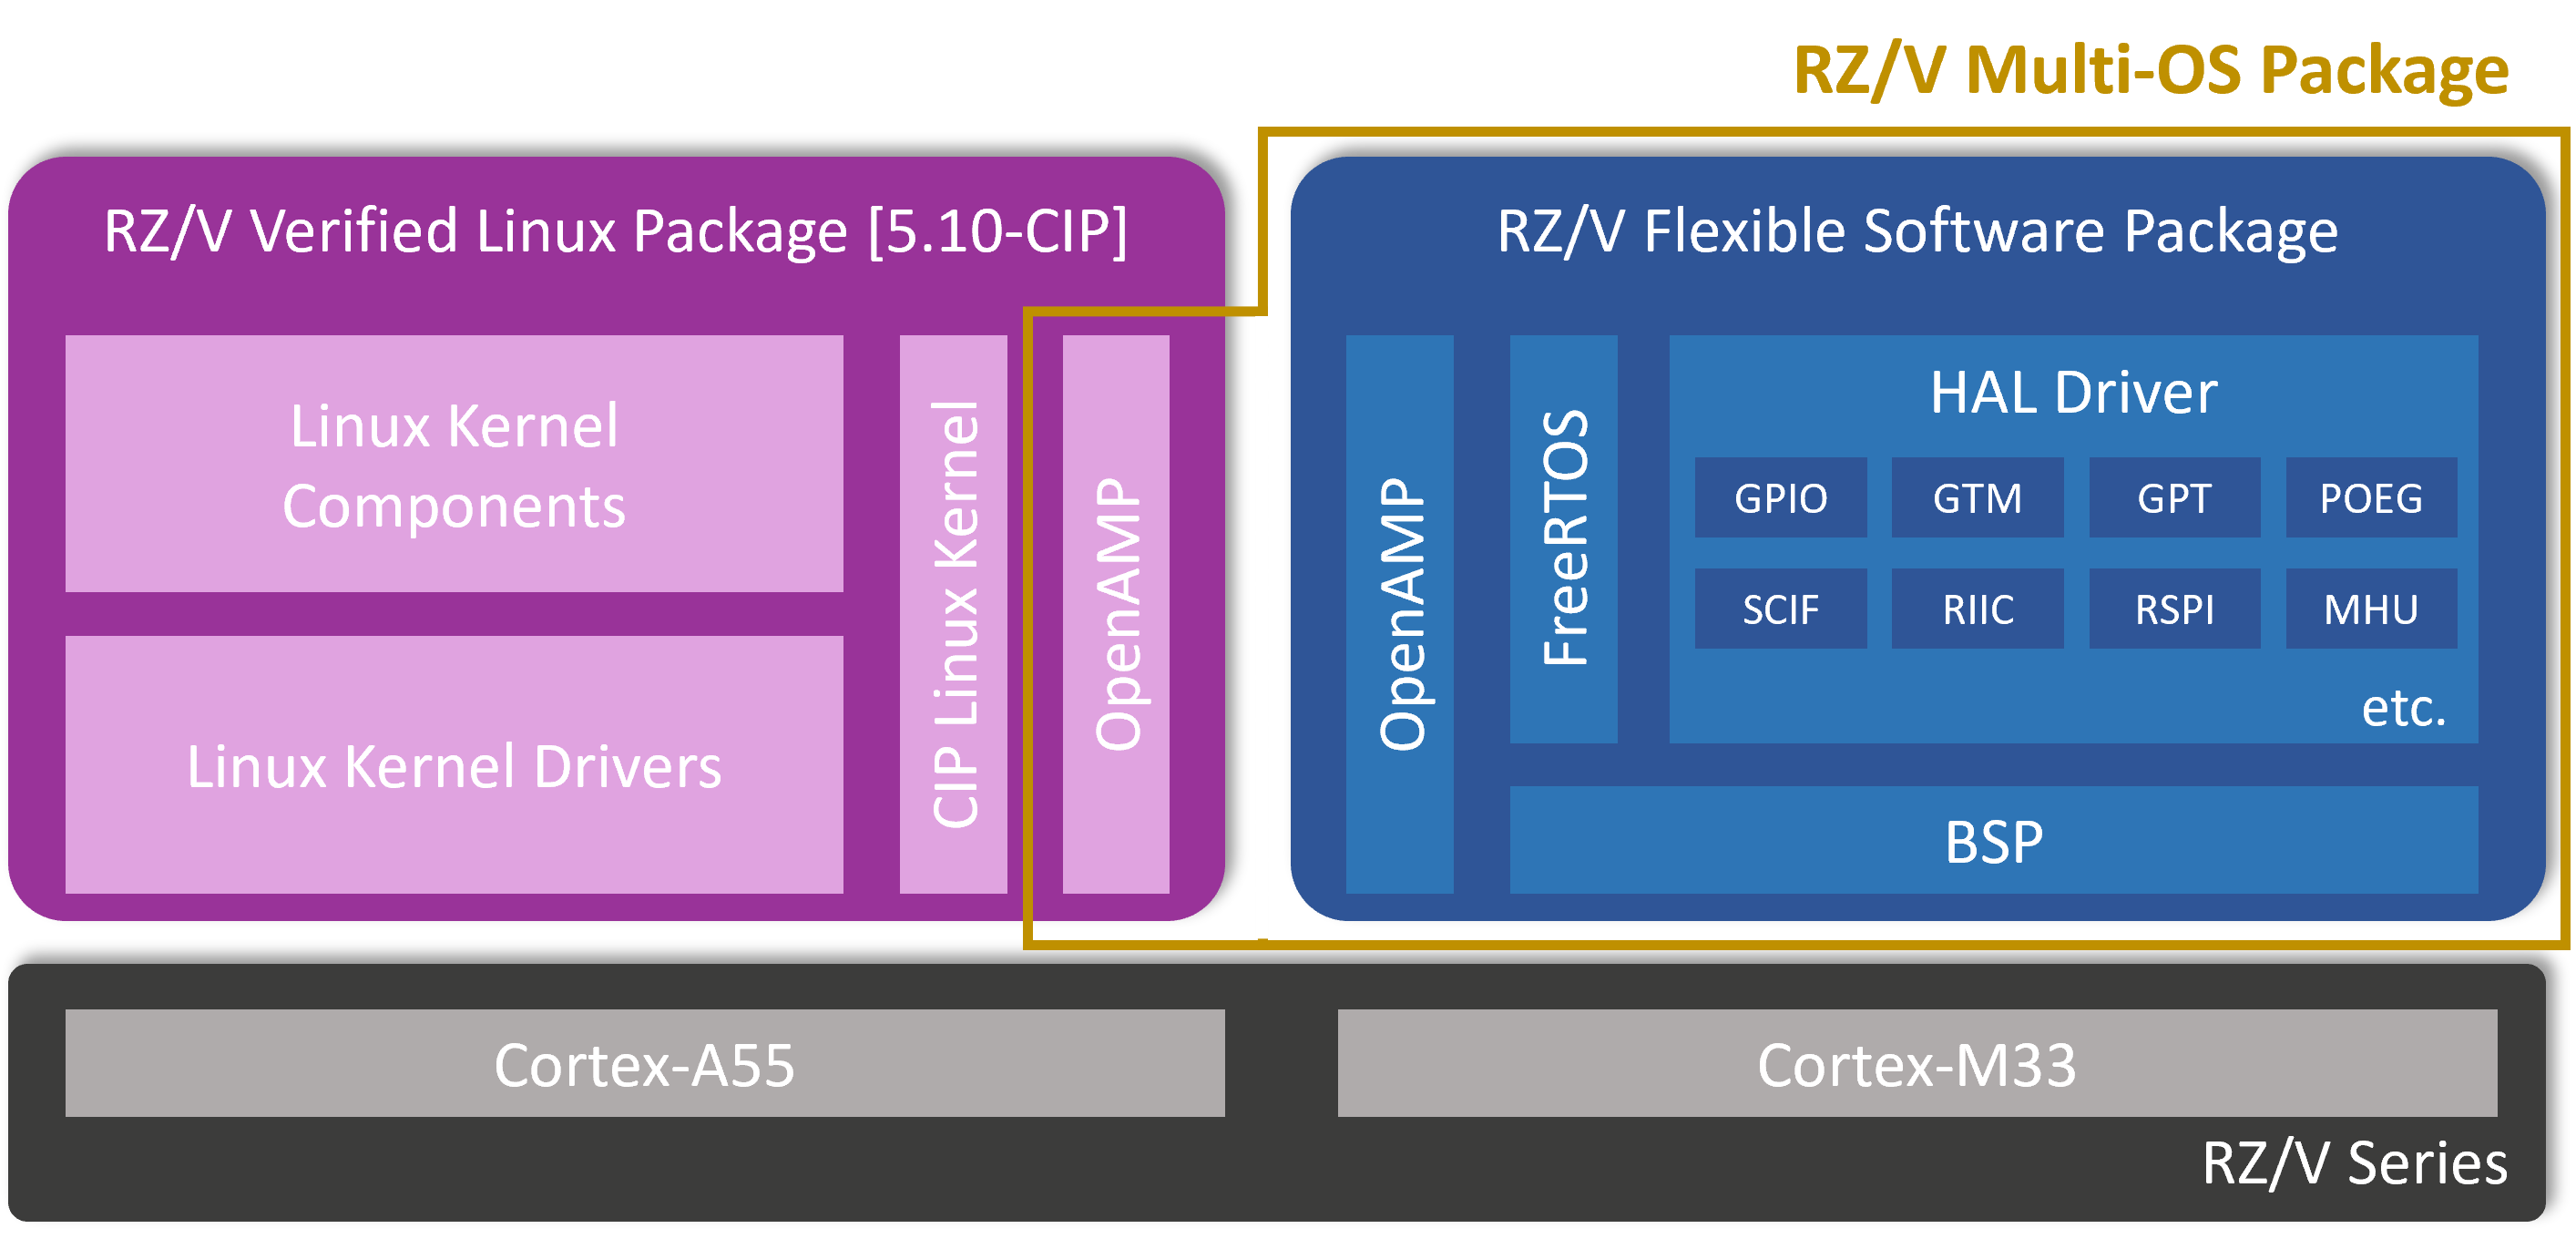 RZ/V Multi-OS Package System Architecture